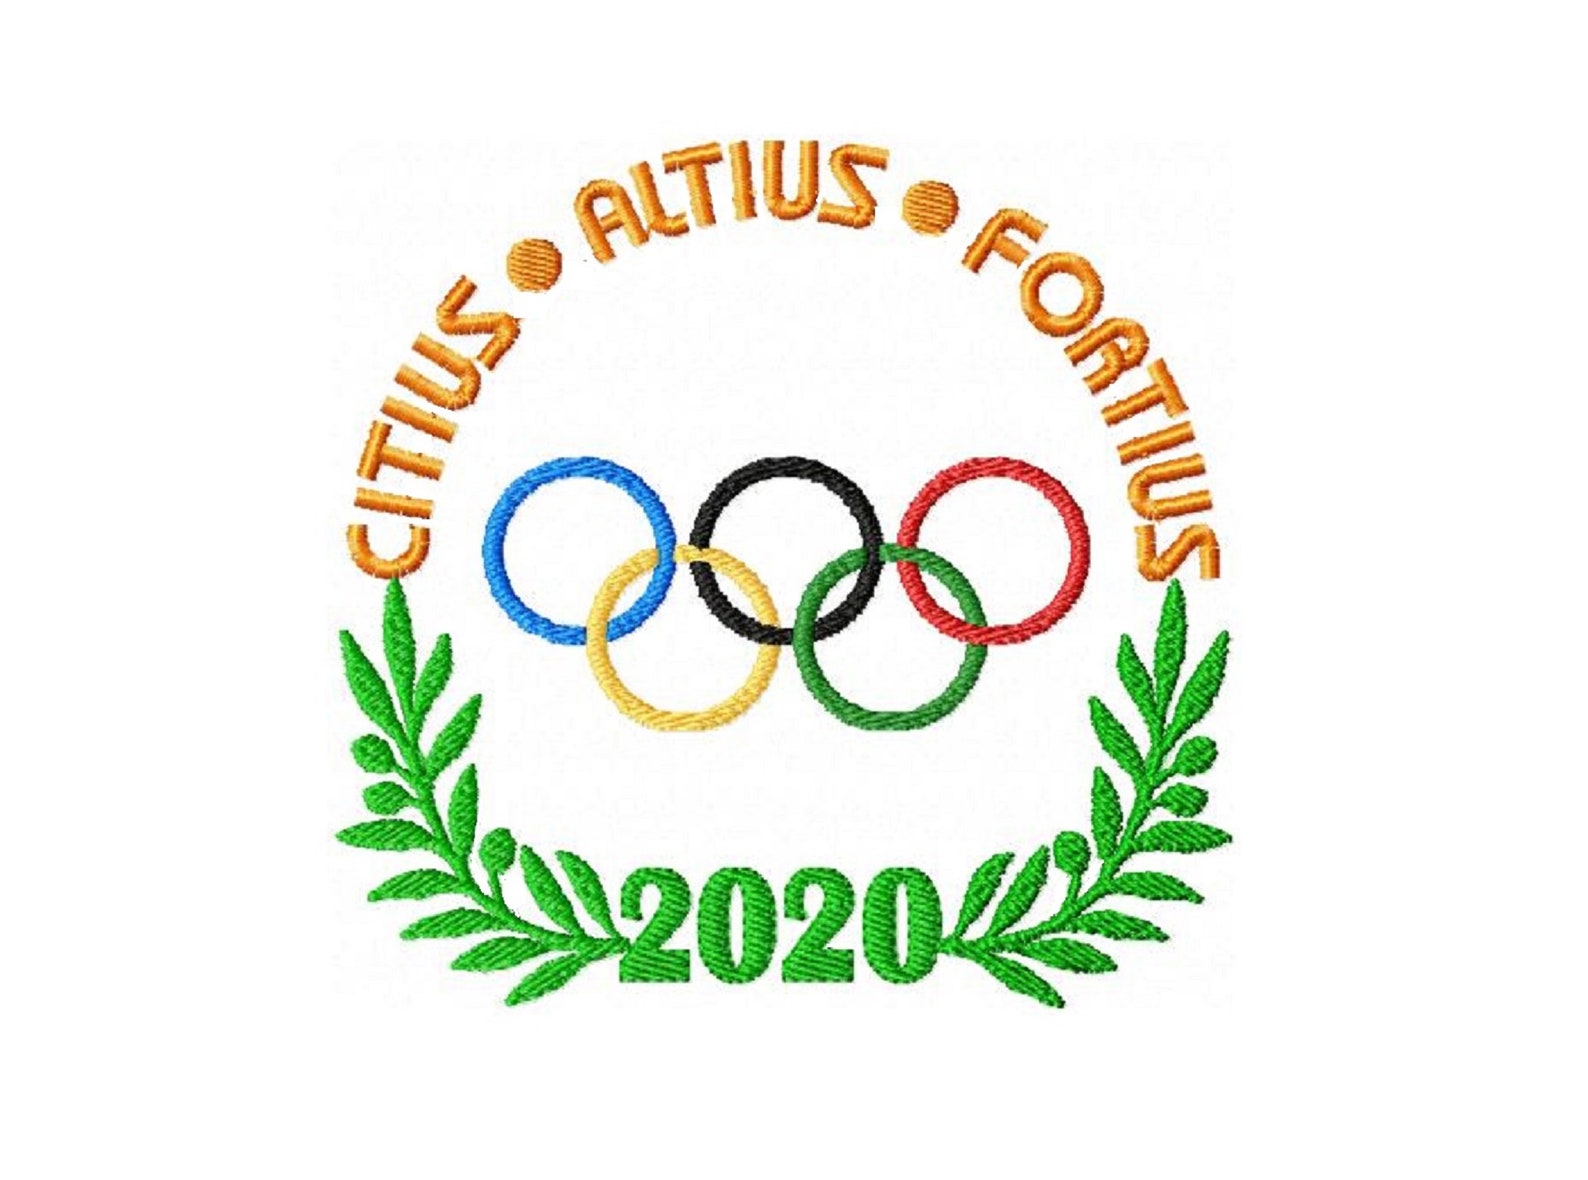 Olympic Games Motto Embroidery Designs Sport Emblems Citius Etsy